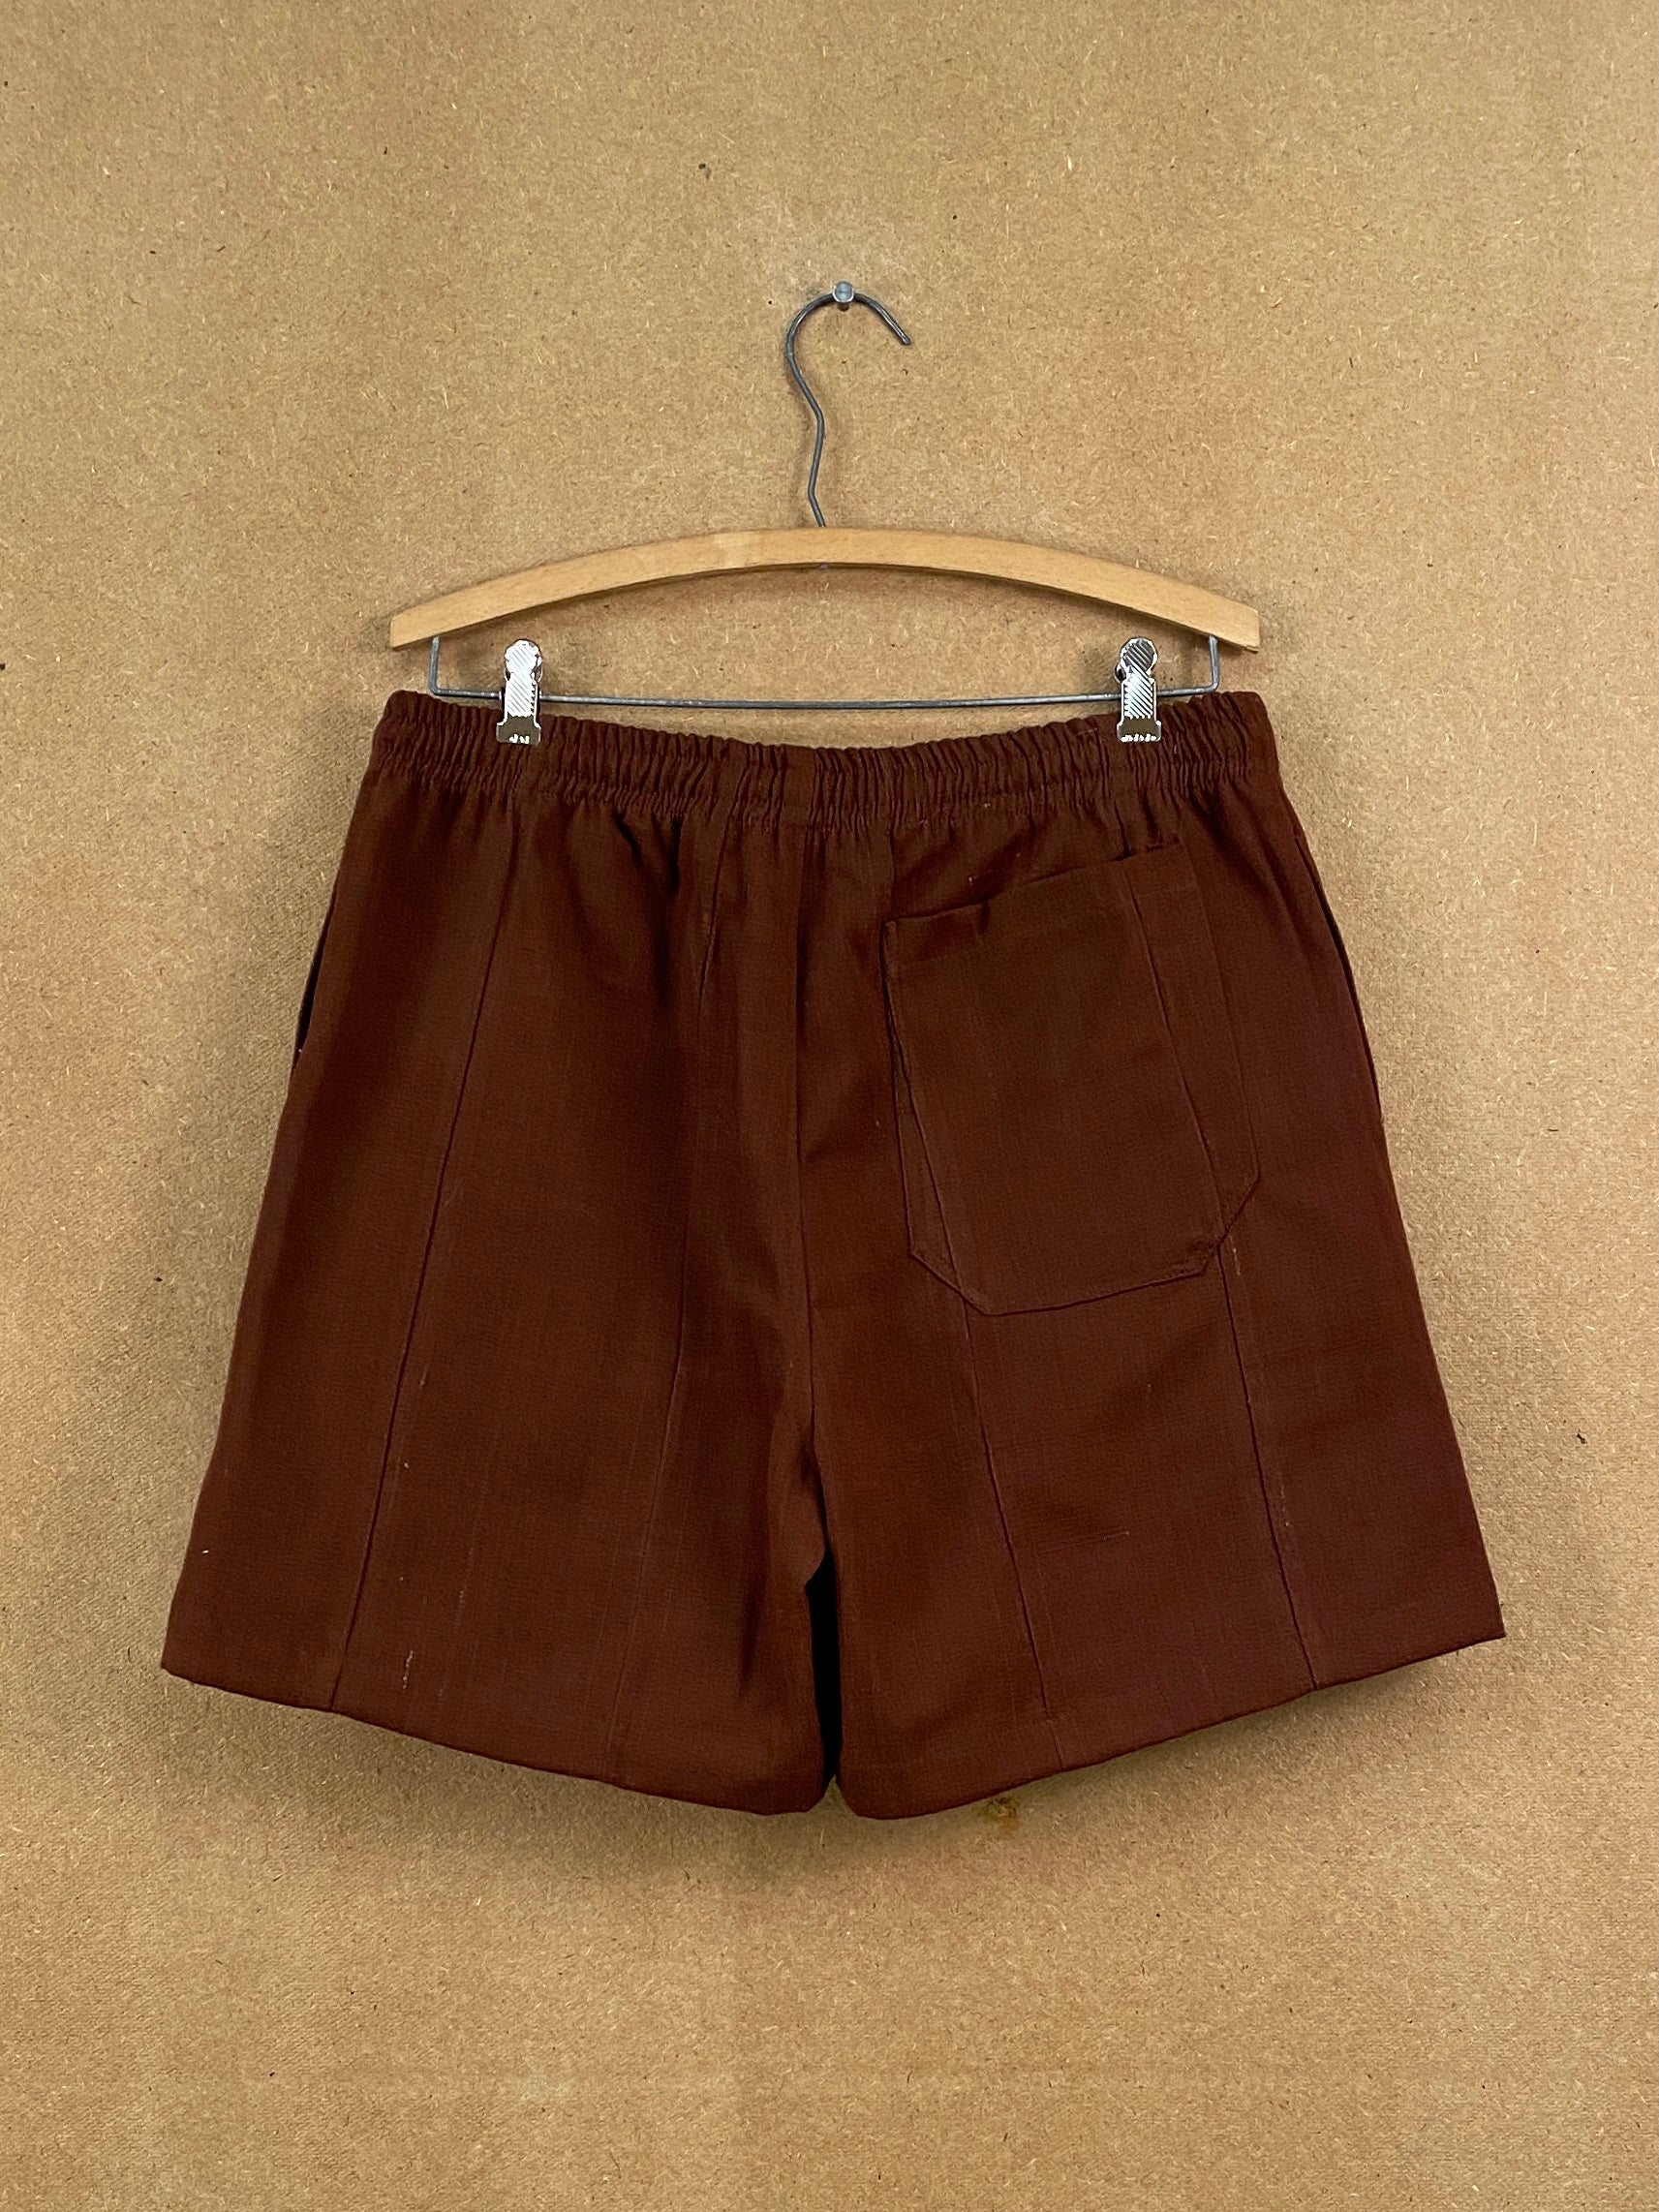 Tobacco Solid Shorts - S/M